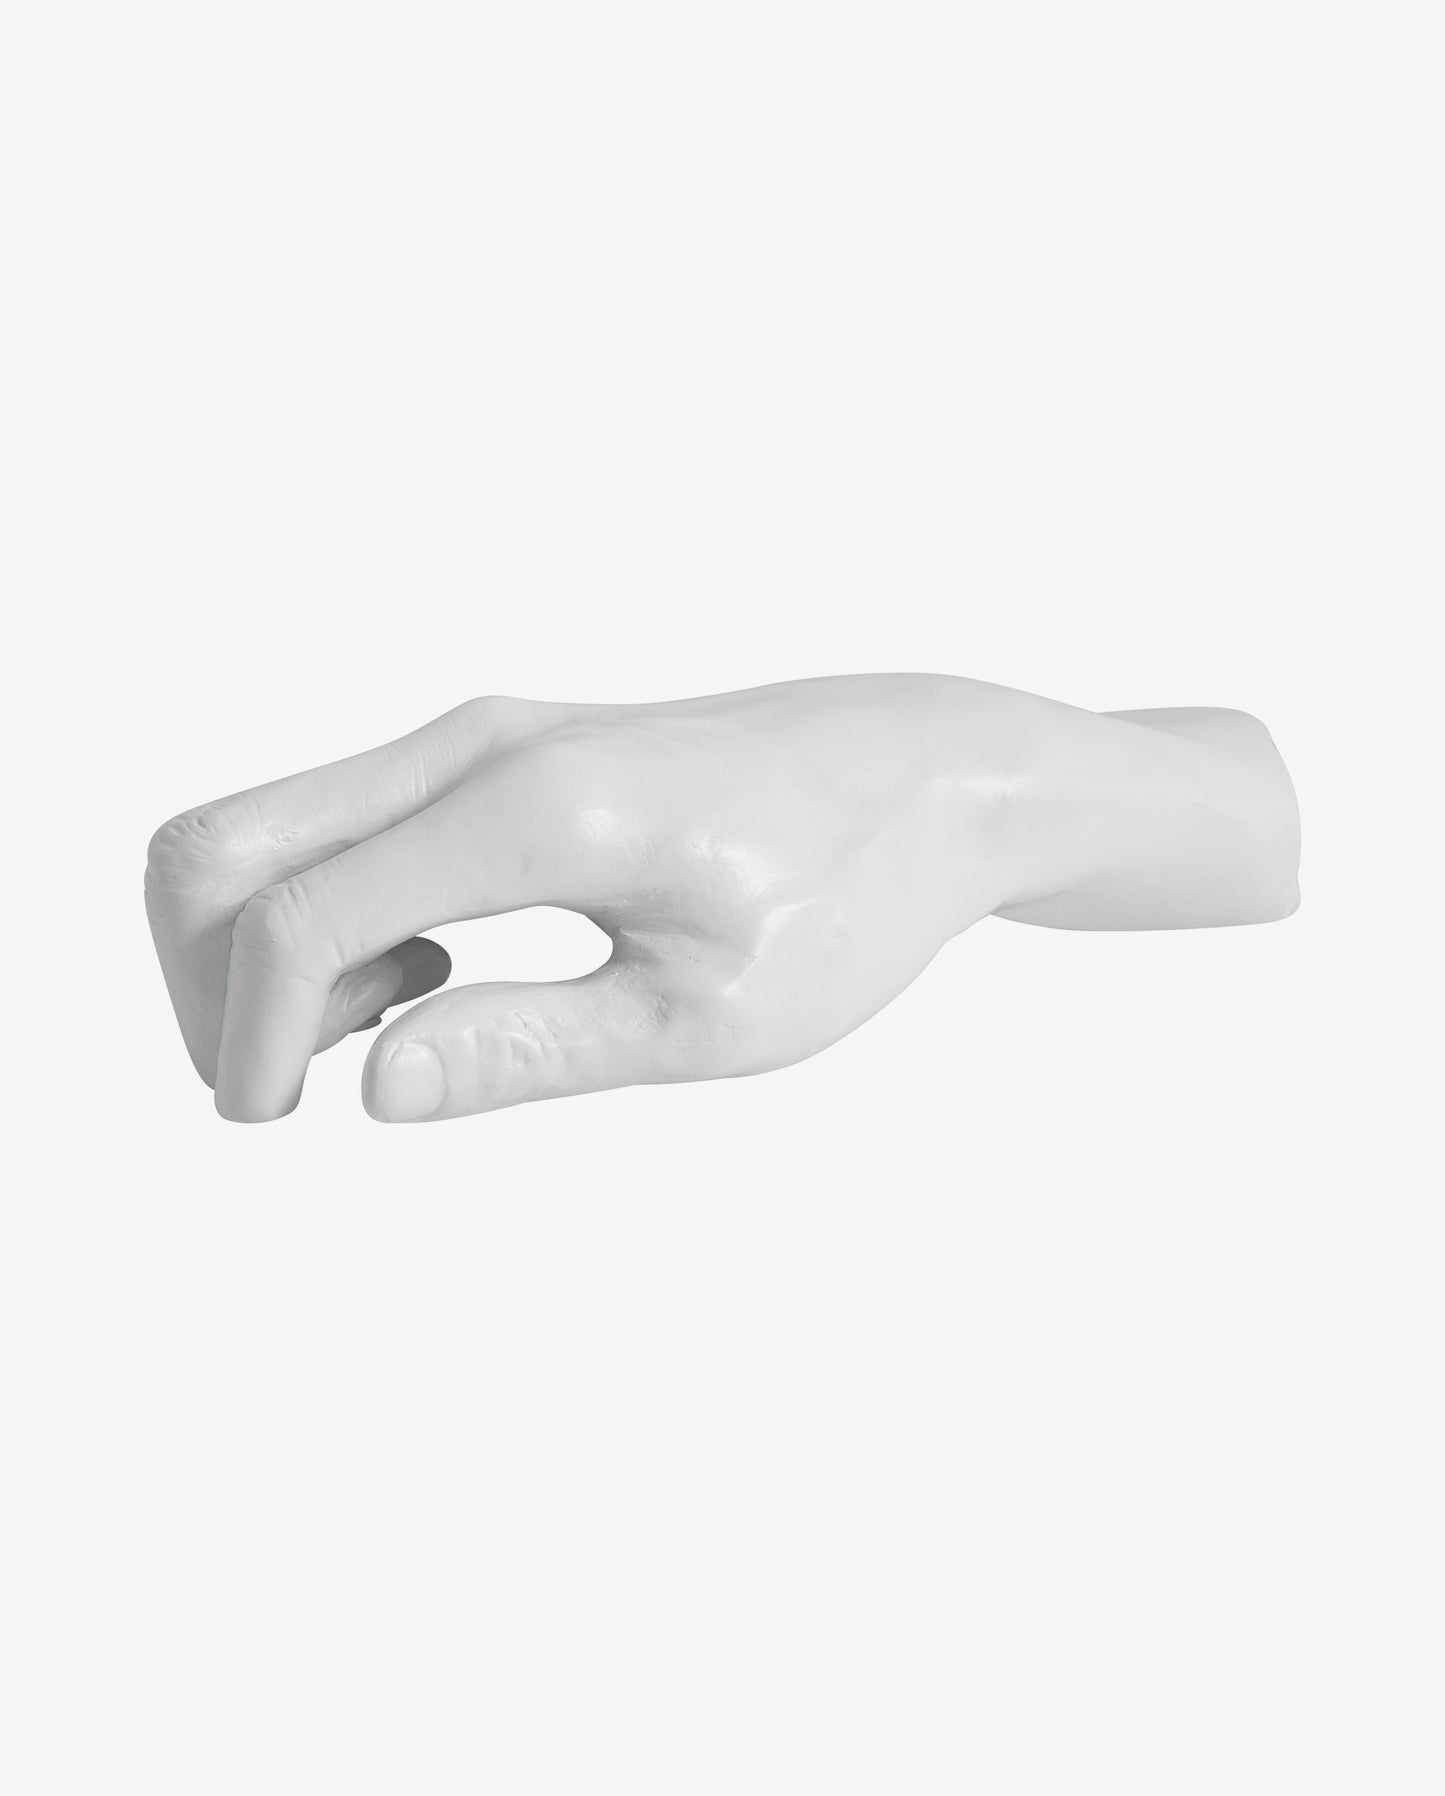 Nordal HAND deco, white